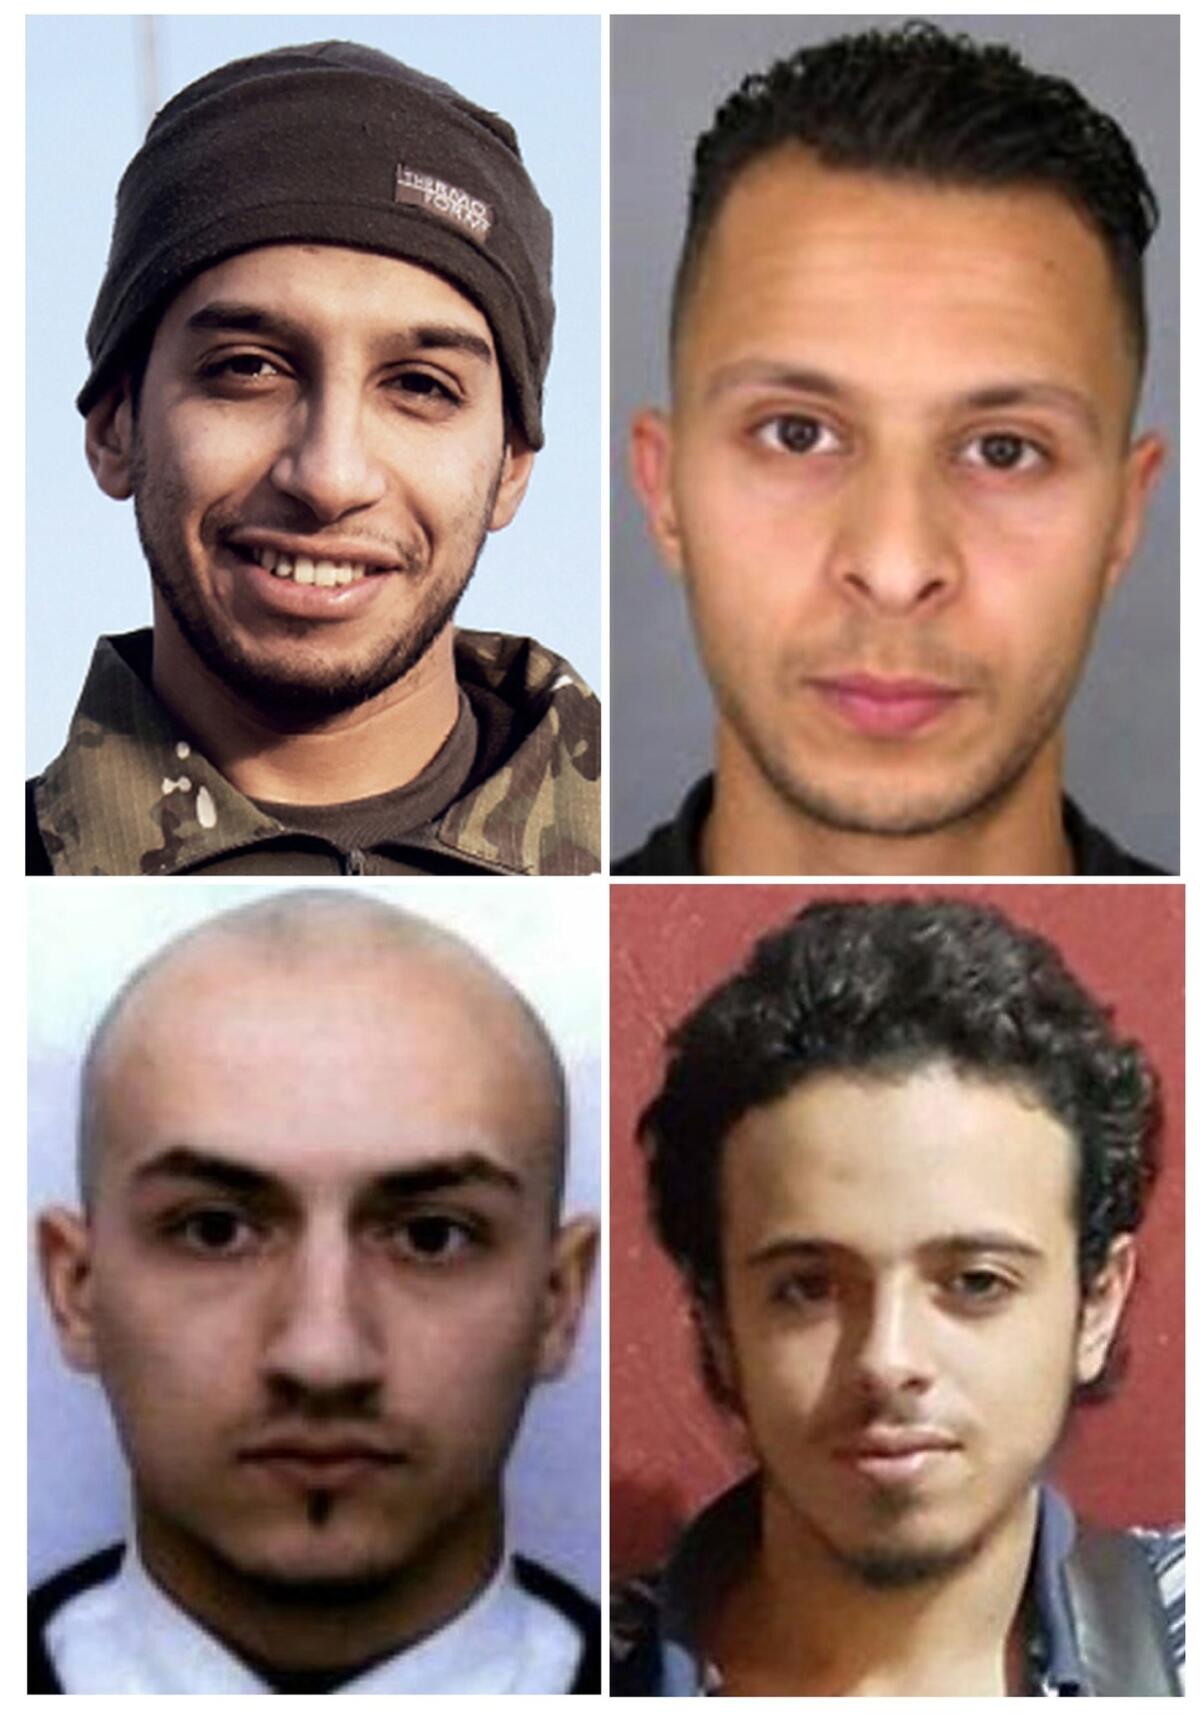 Some of the suspects in the Paris attacks: From left, Abdelhamid Abaaoud, Salah Abdeslam, Bilal Hadfi and Samy Amimour.